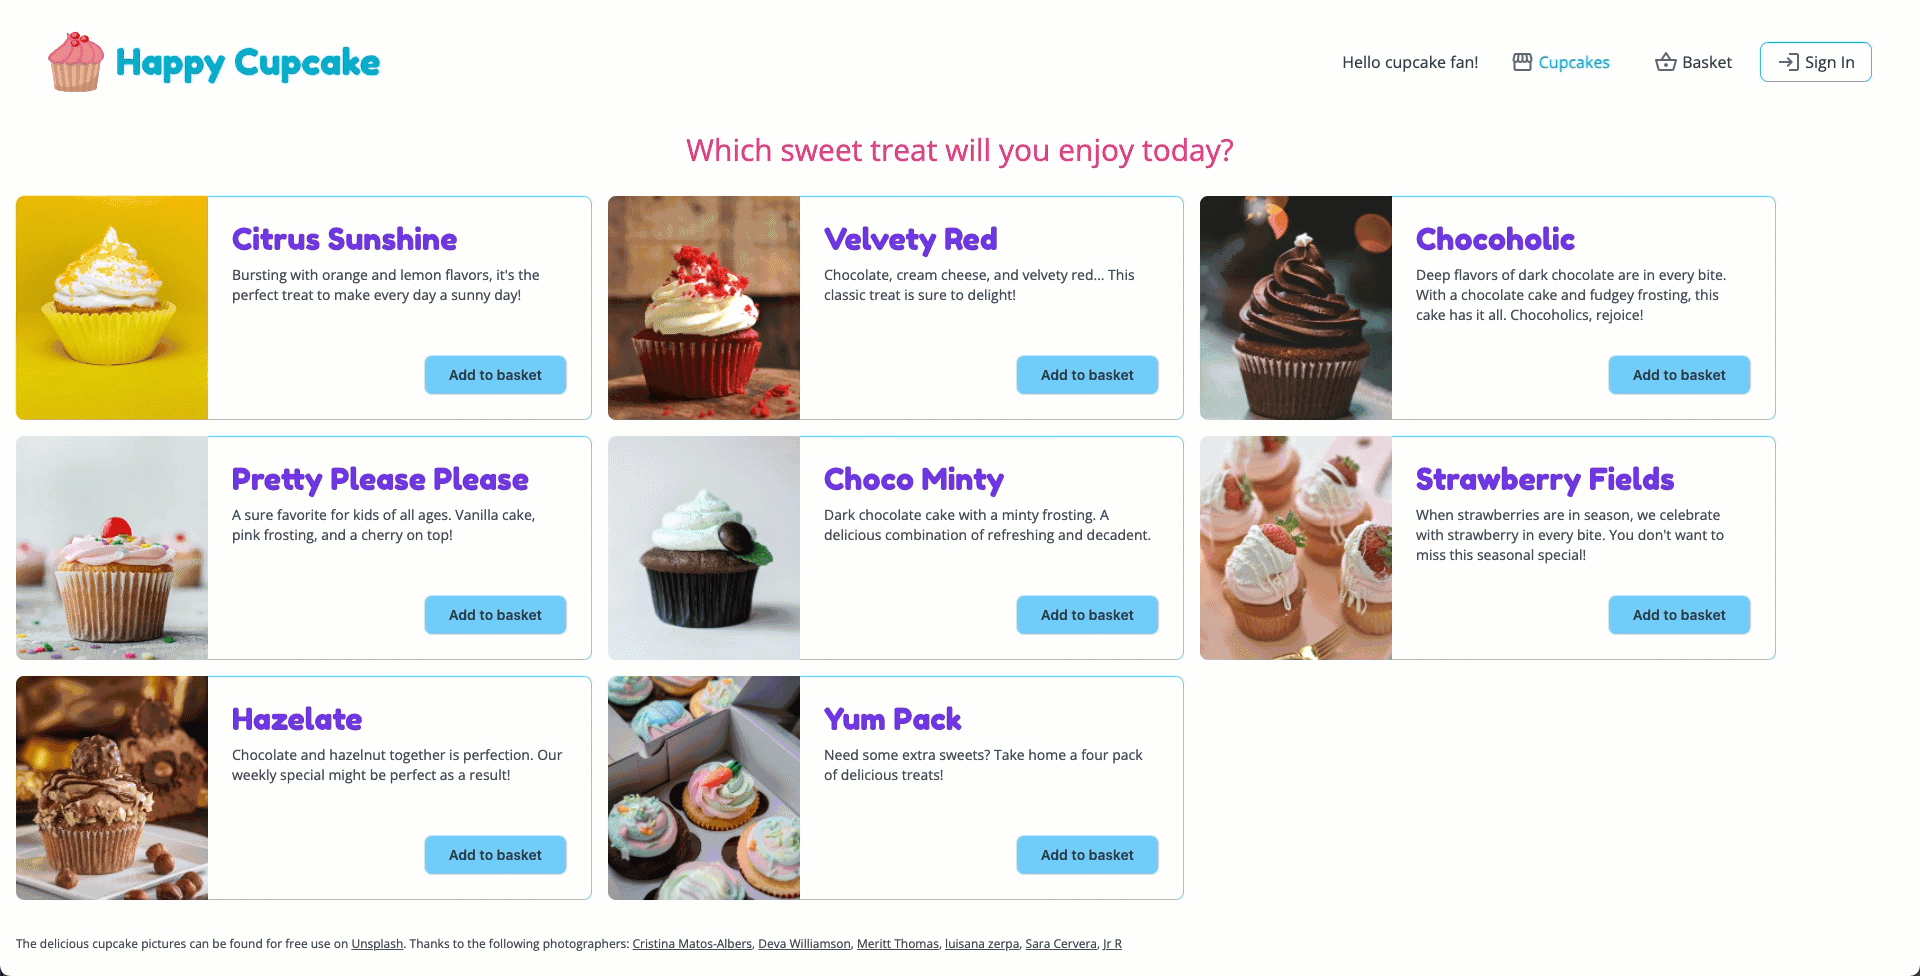 Animated gif showing the final project with micro-frontends that handle the cupcake shopping basket, authentication, and profile information